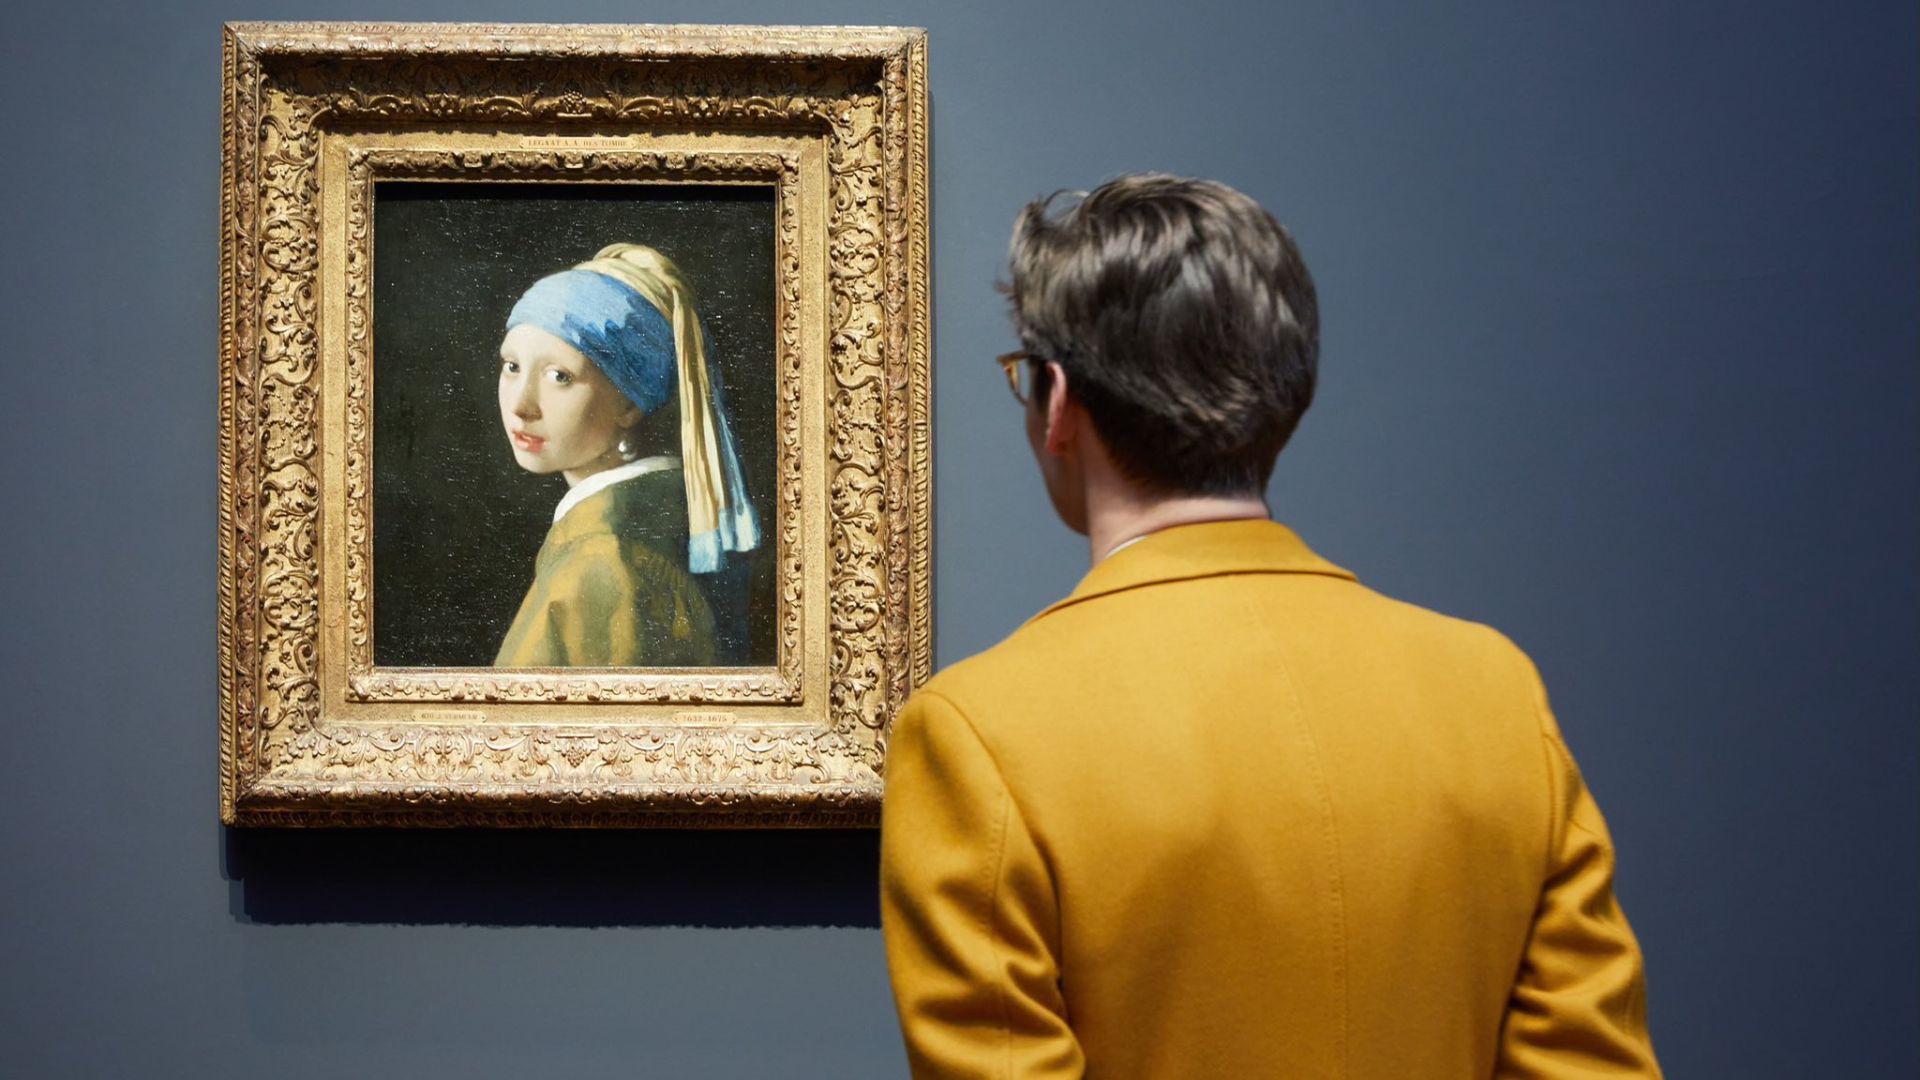 Vermeer. The Greatest Exhibition: il nuovo trailer